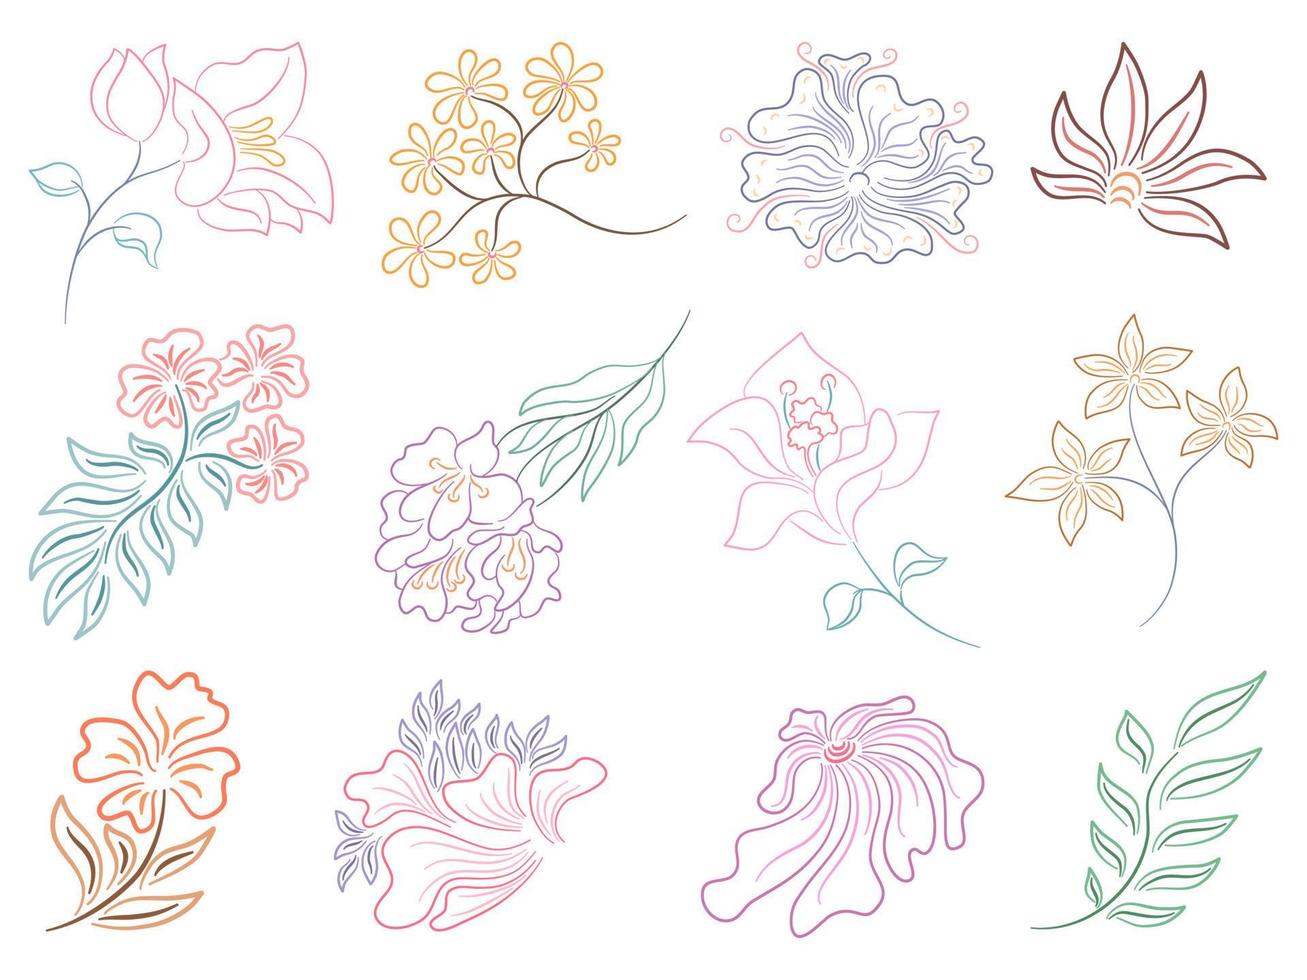 Flowers line arts collection designed in doodle style on a white background for spring theme decoration, wedding, card design, sticker, paper decoration, digital printing, bags patterns and more vector